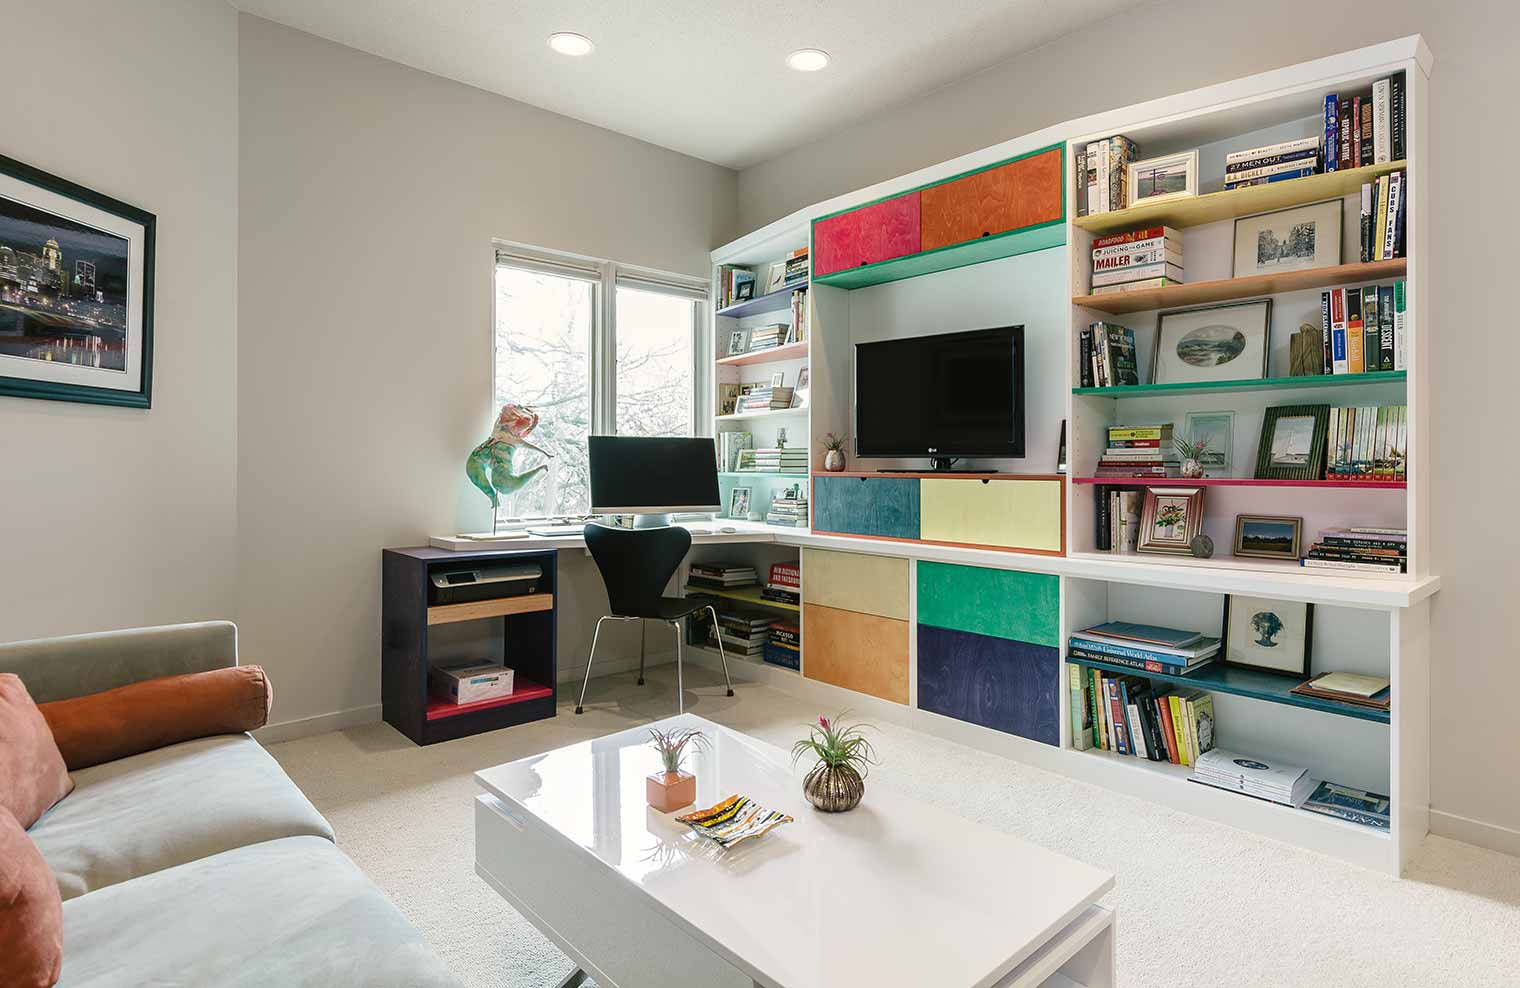 Built-in custom bookshelves, storage, entertainment center and desk create colorful, functional space solutions for a Des Moines condo, Silent Rivers